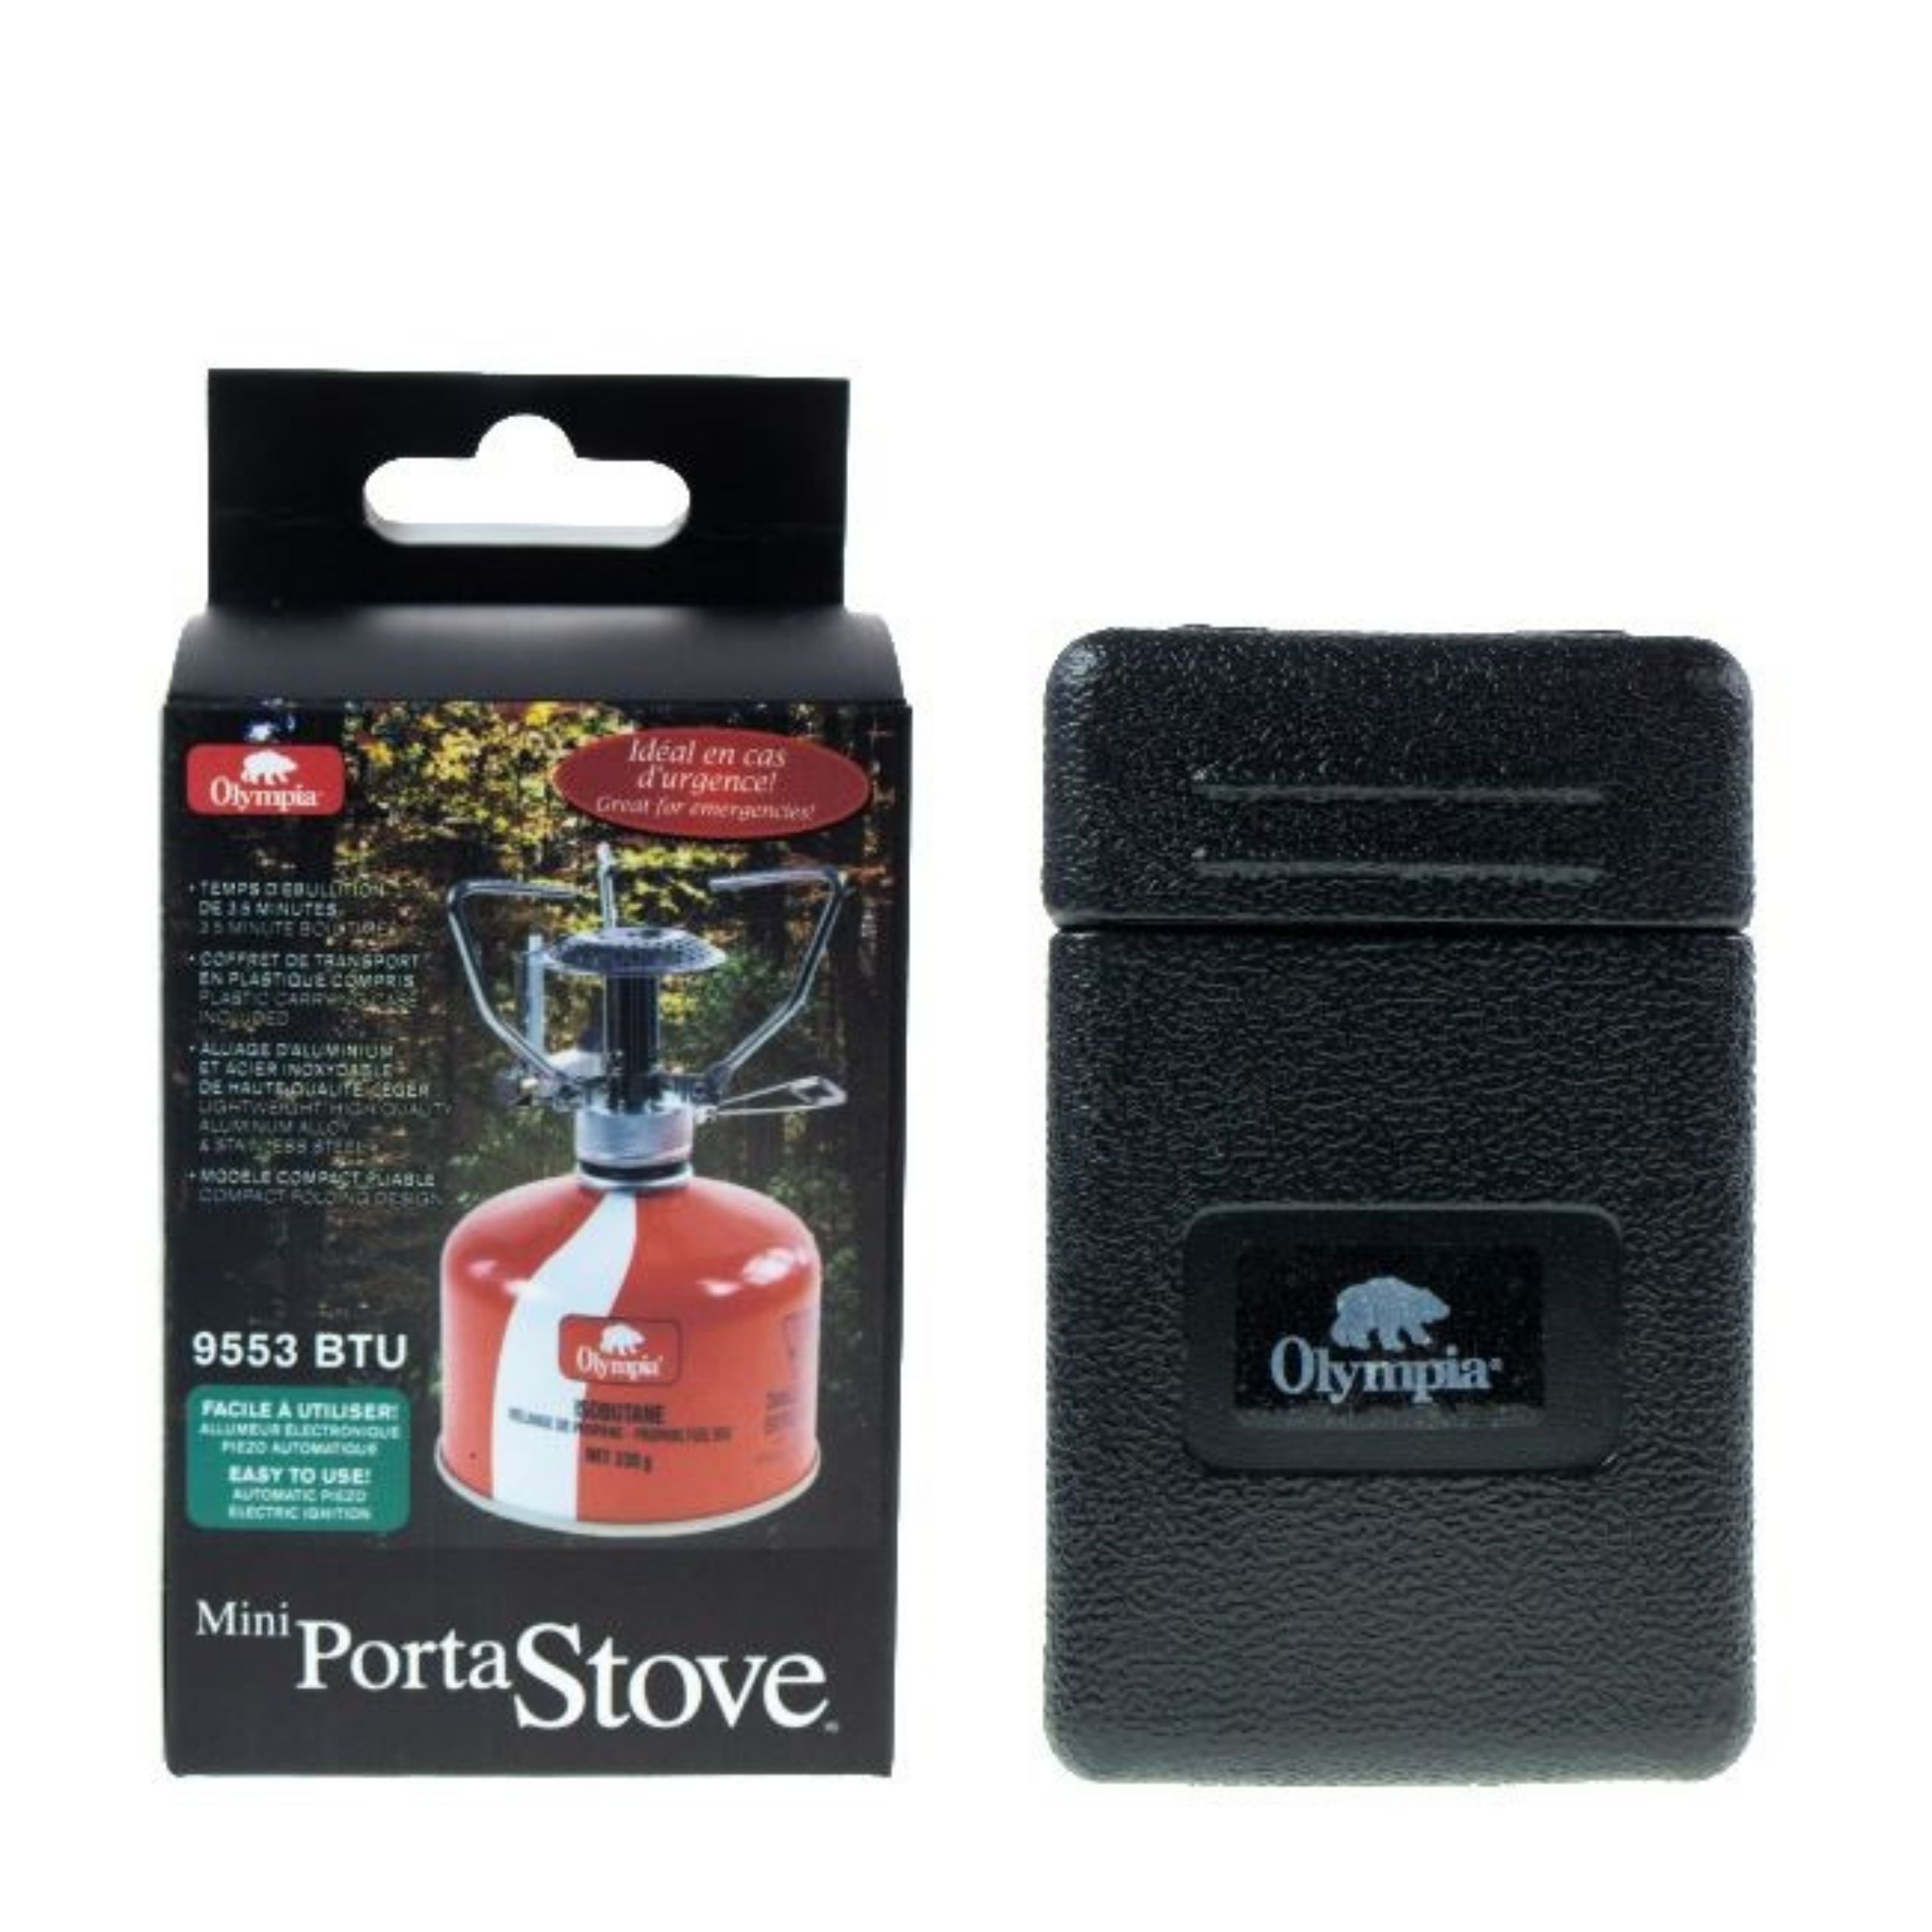 Camping stove isobutane with piezo ignition